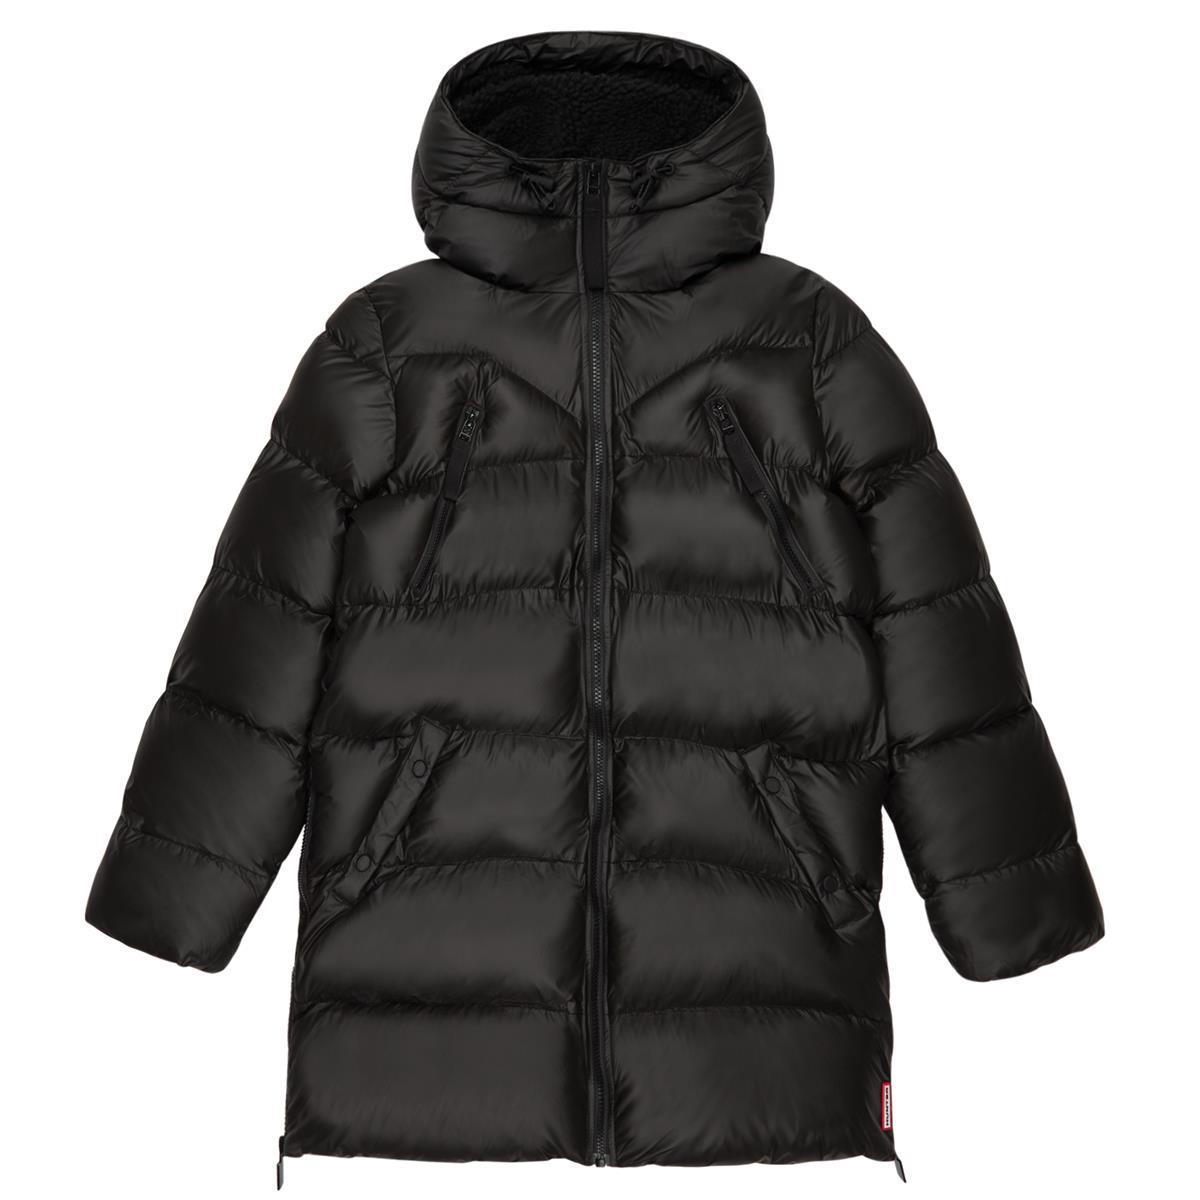 What are the specifications of the Hunter puffer jacket?